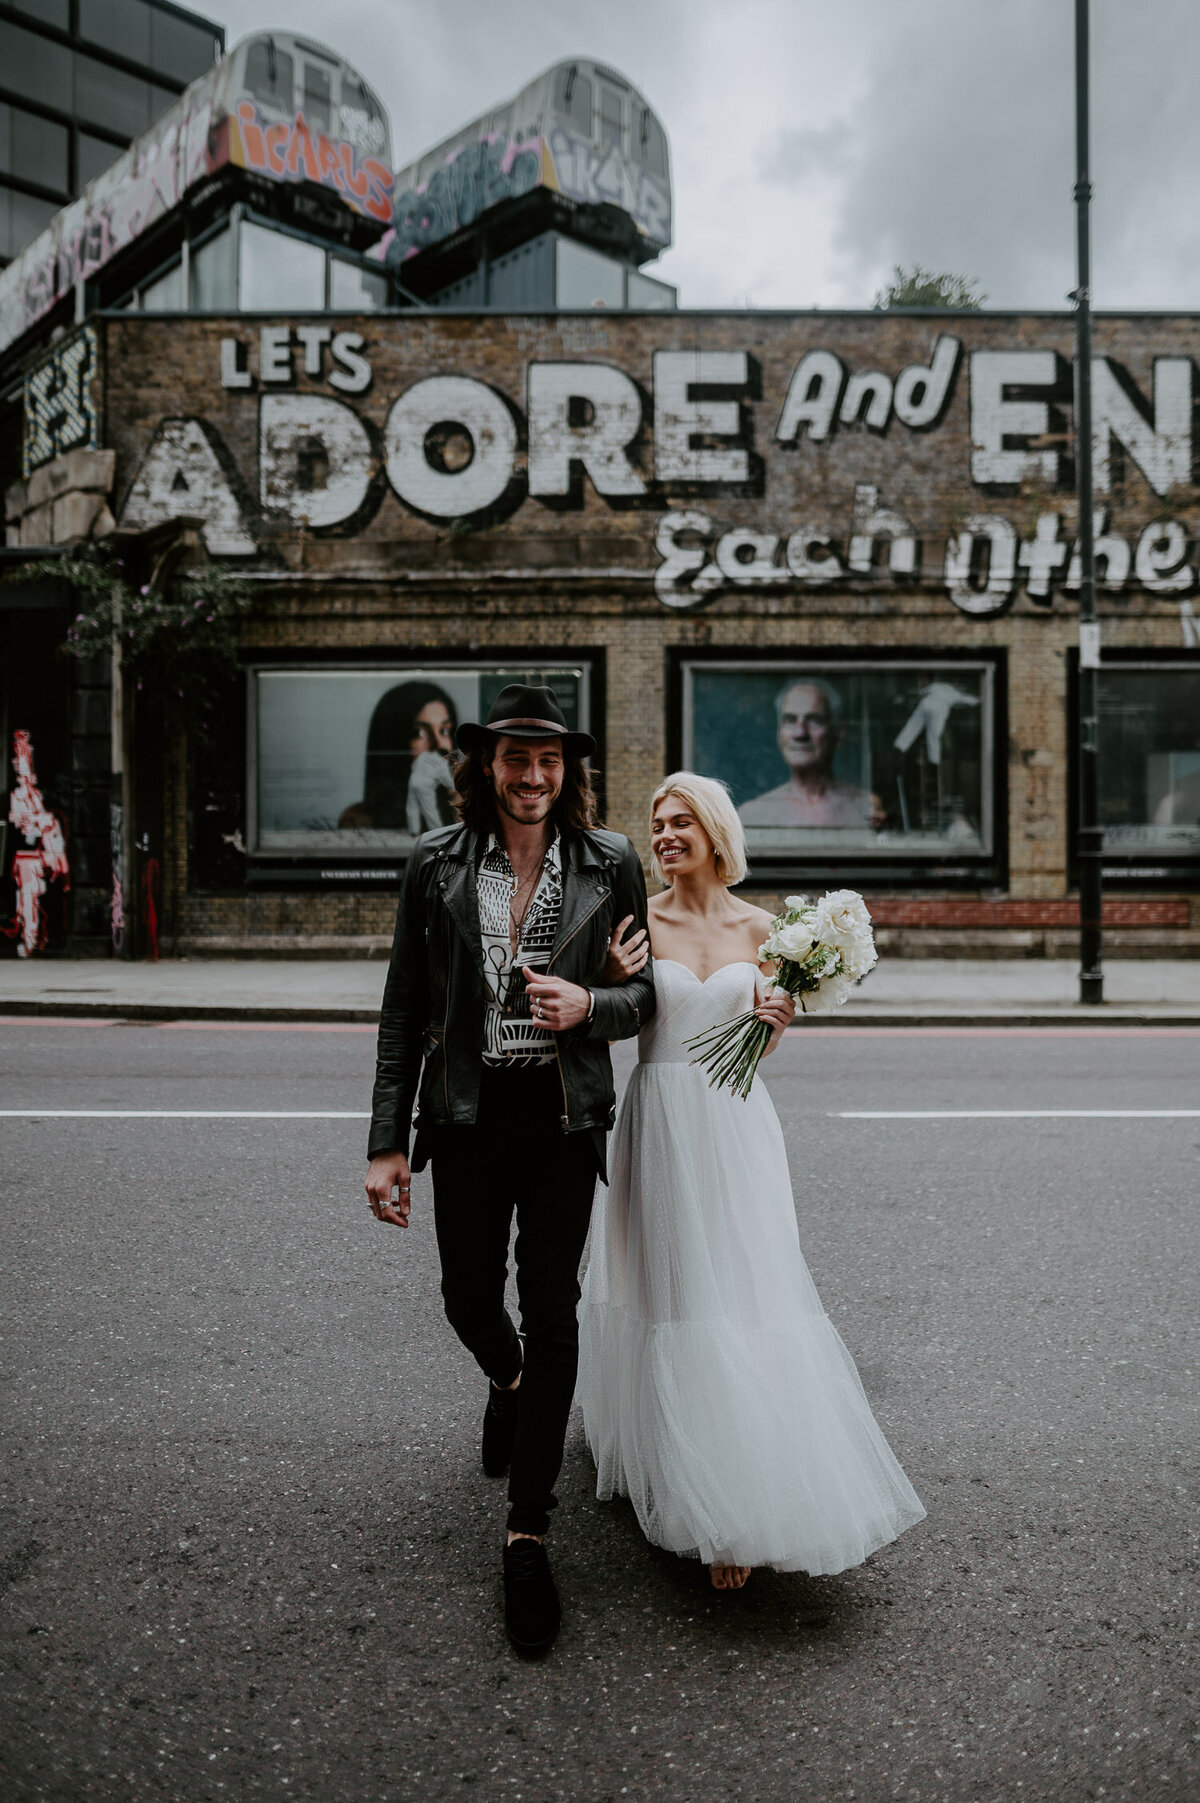 An alternative couple cross the road in Shoreditch, London. The bride is wearing a shoulder cut Justin Alexander wedding dress whilst the groom is dressed casually with a black hat and boots.